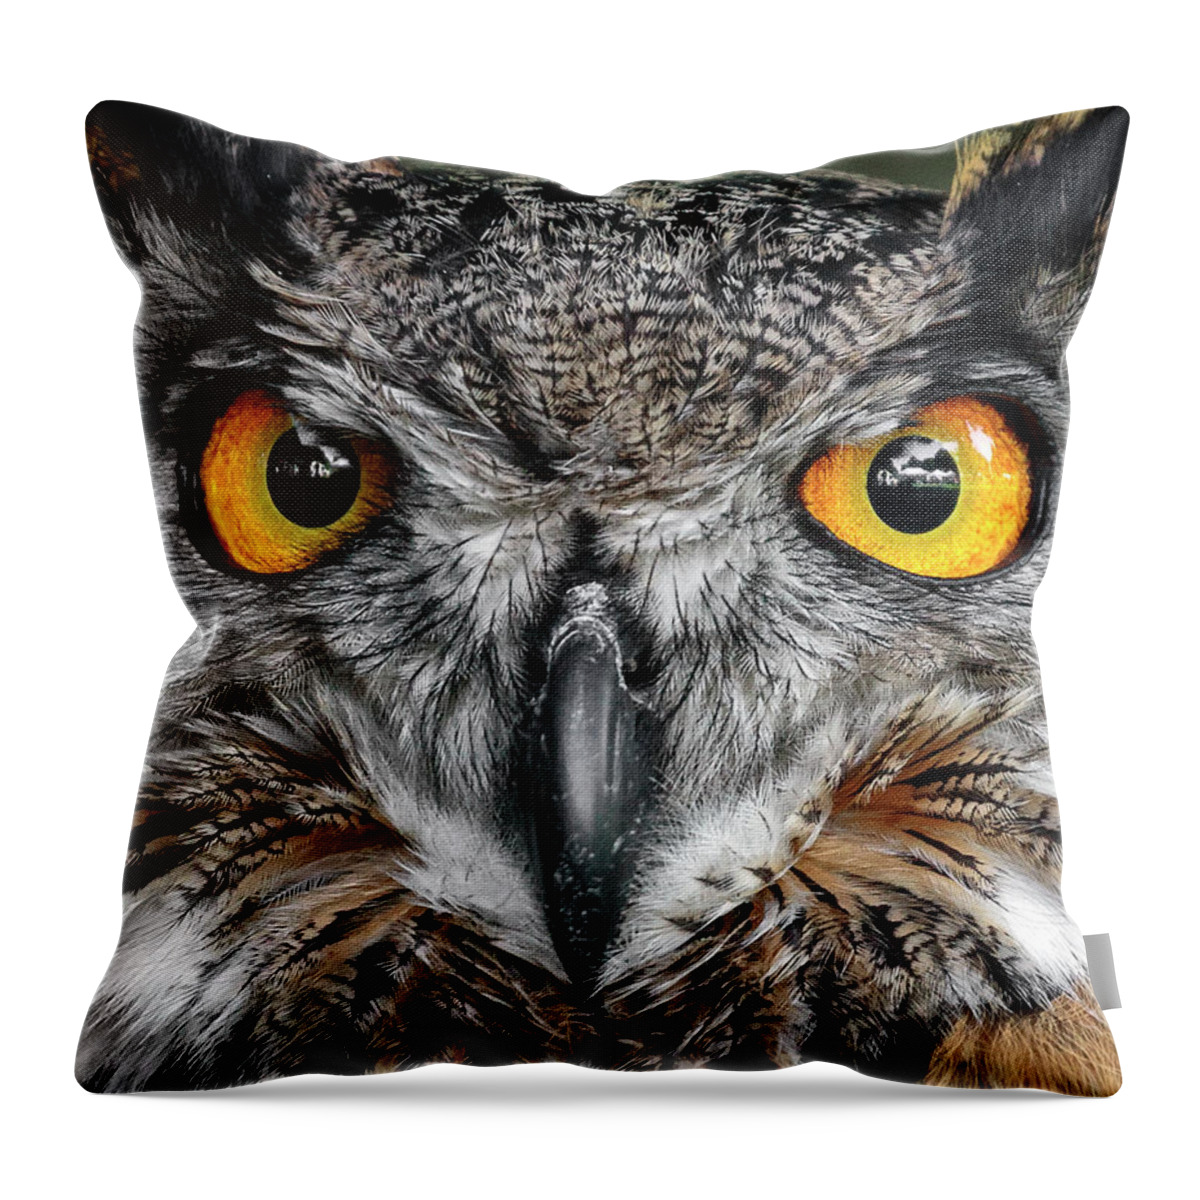 Hypnotic Throw Pillow featuring the photograph Hypnotic #2 by Wes and Dotty Weber